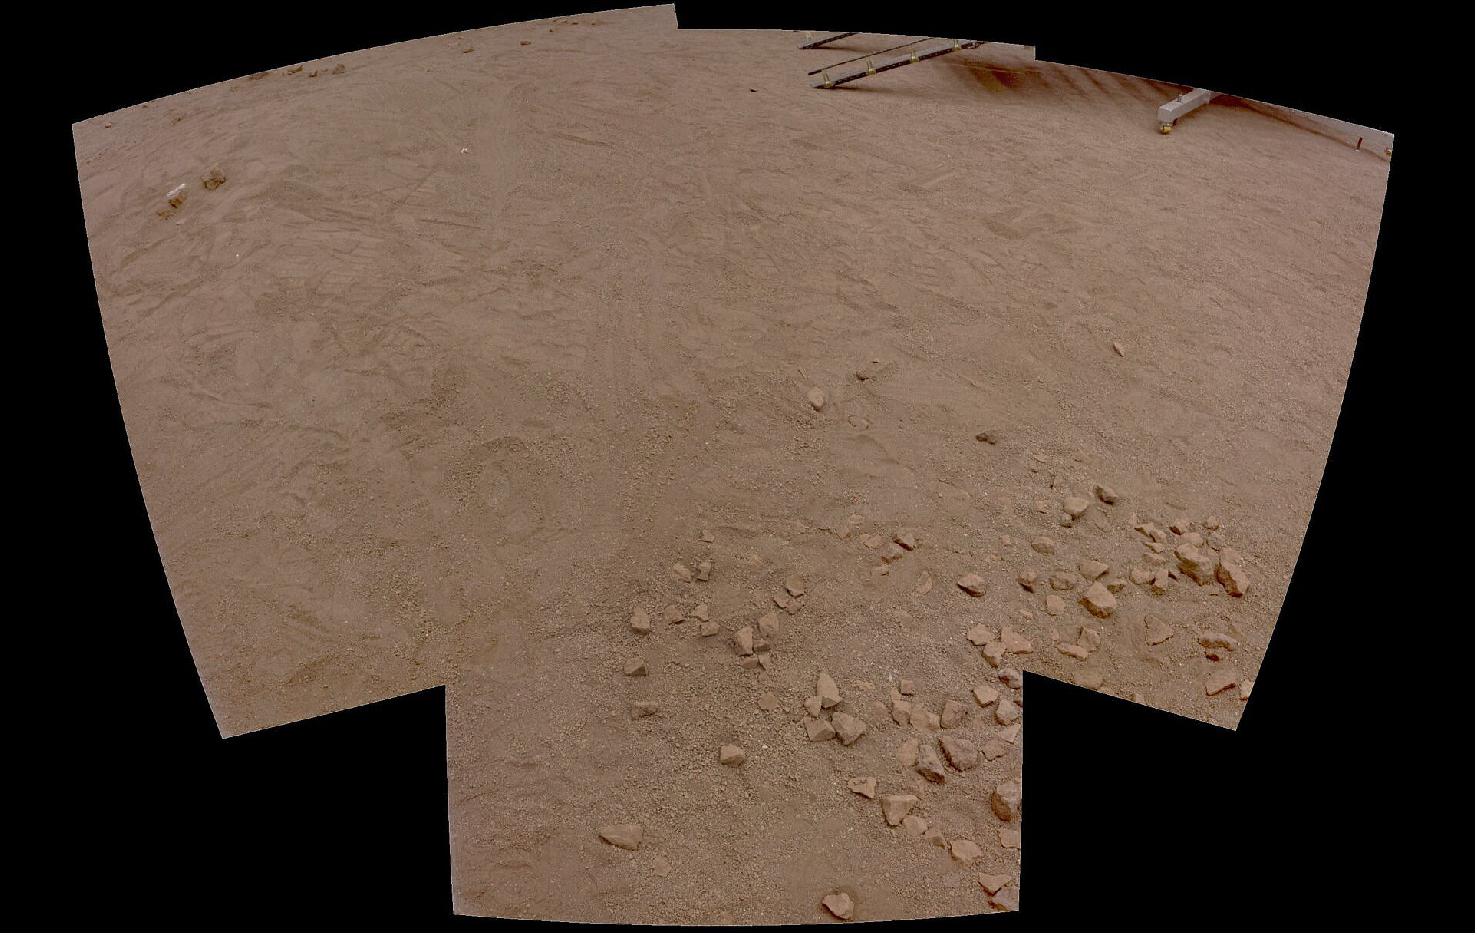 Figure 19: Four images taken by PanCam’s wide-angle cameras were stitched together to form this mosaic of the surface of the Mars Terrain Simulator at the ALTEC premises in Turin, Italy. Some footprints and the legs and ramps of Kazachok landing platform model are visible at the top right. - Color has been determined using three of PanCam’s 11 filters (image credit: ESA/ExoMars/PanCam team)